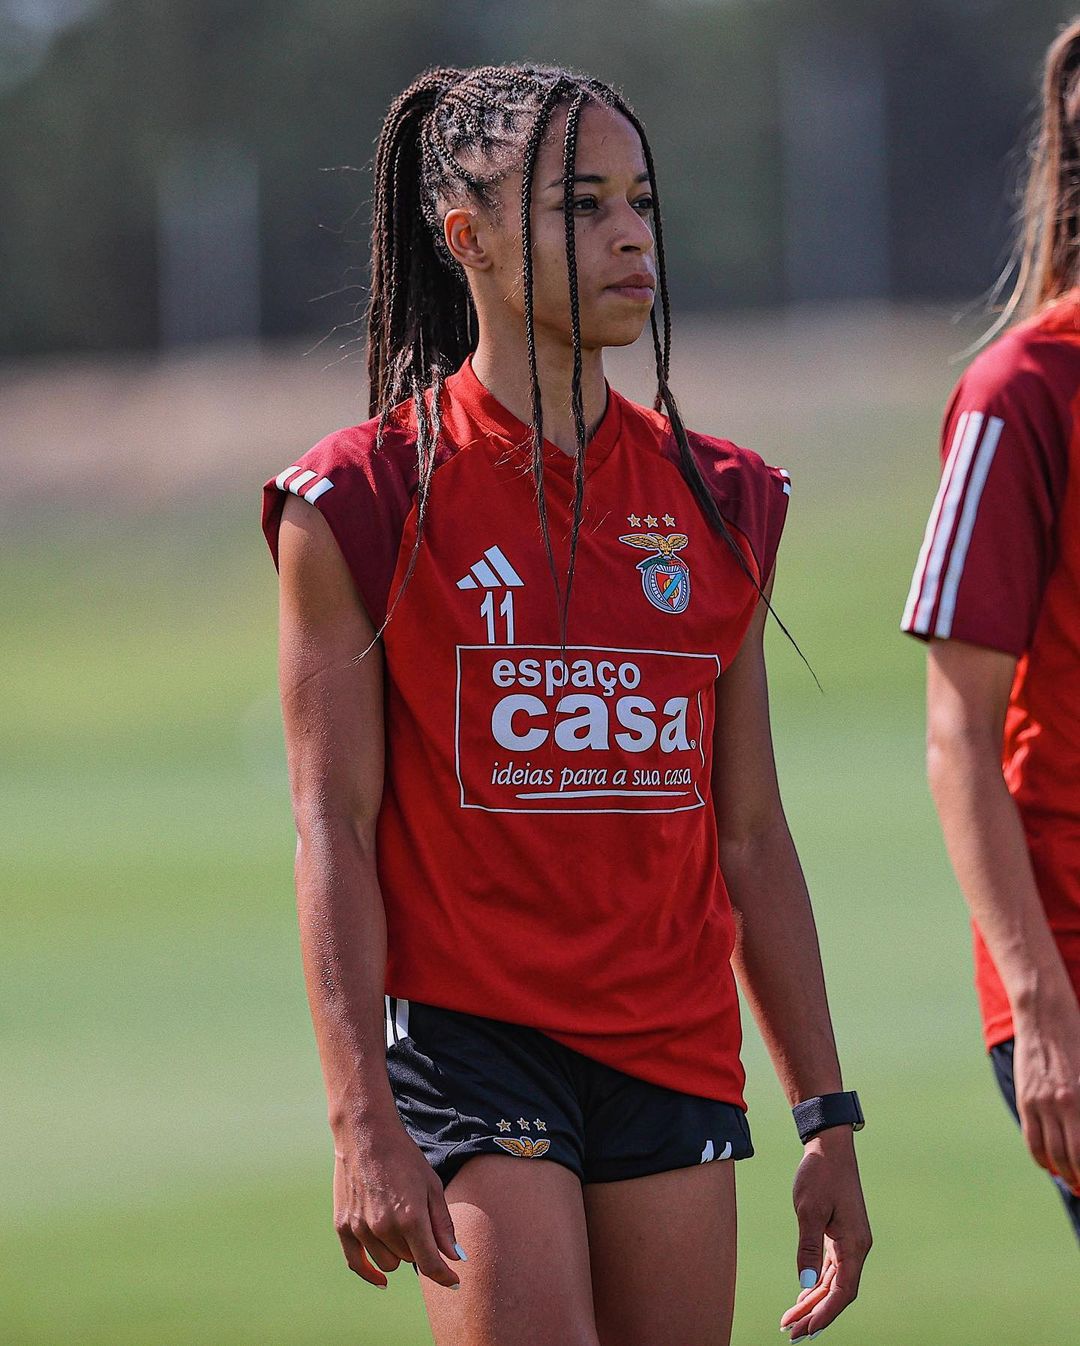 Benfica: Jessica Silva misses the new call-up